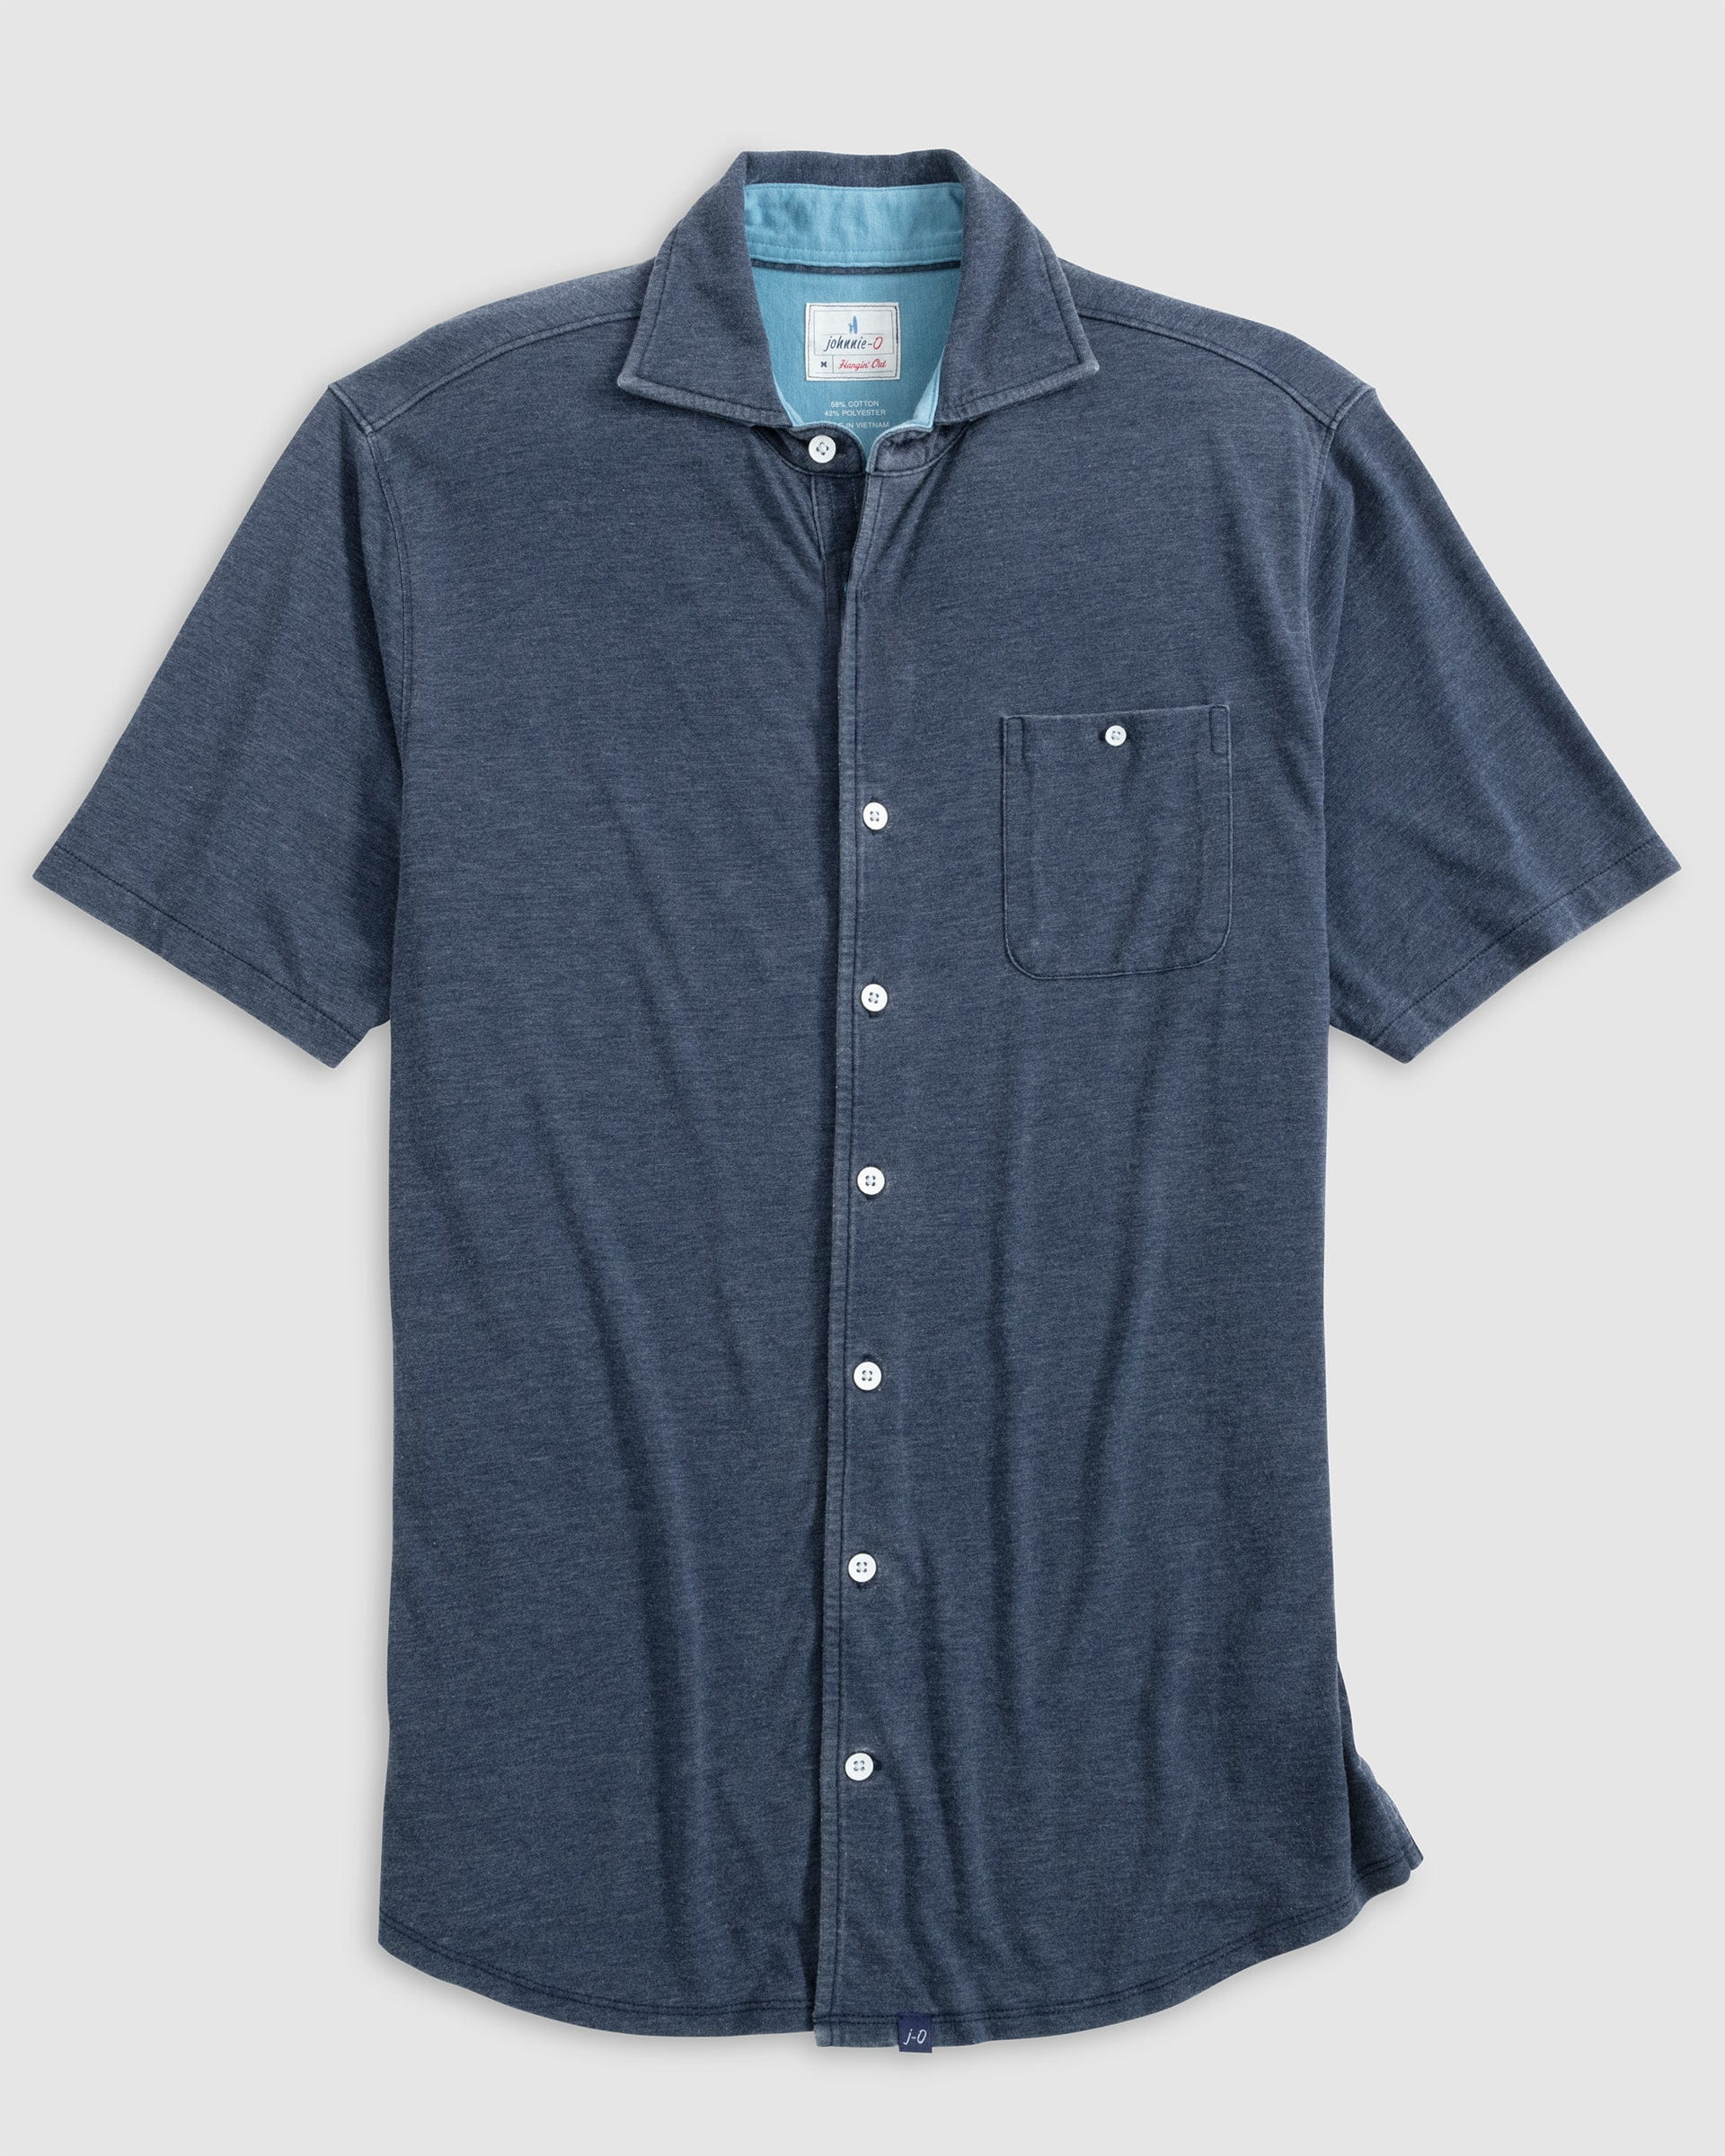 Crouch Hangin' Out Button Up Shirt